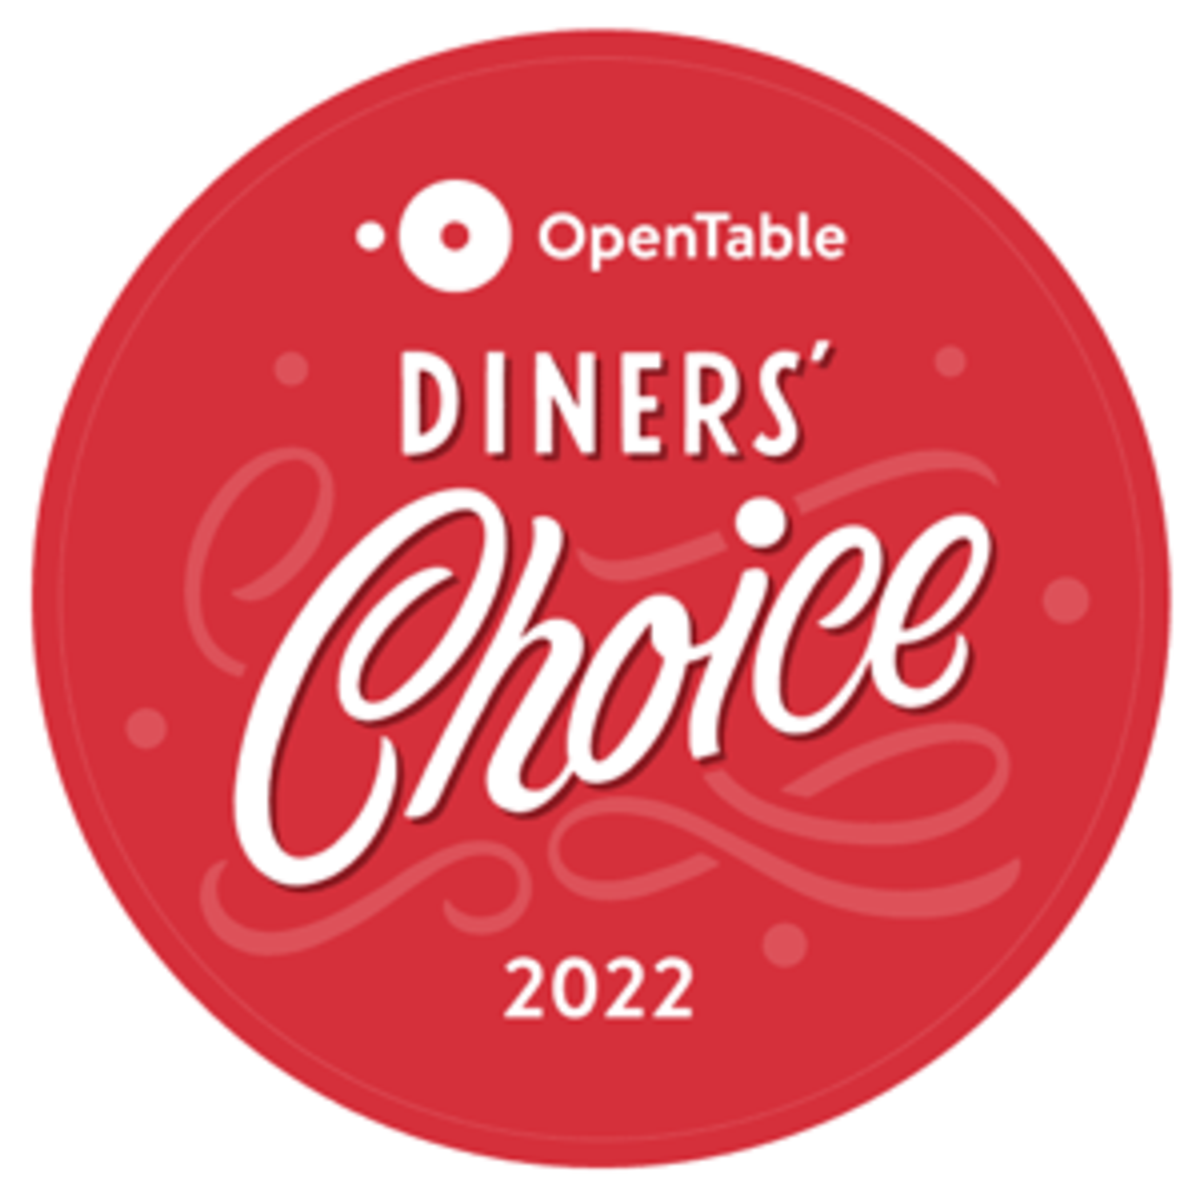 OpenTable Diners Choice 2022